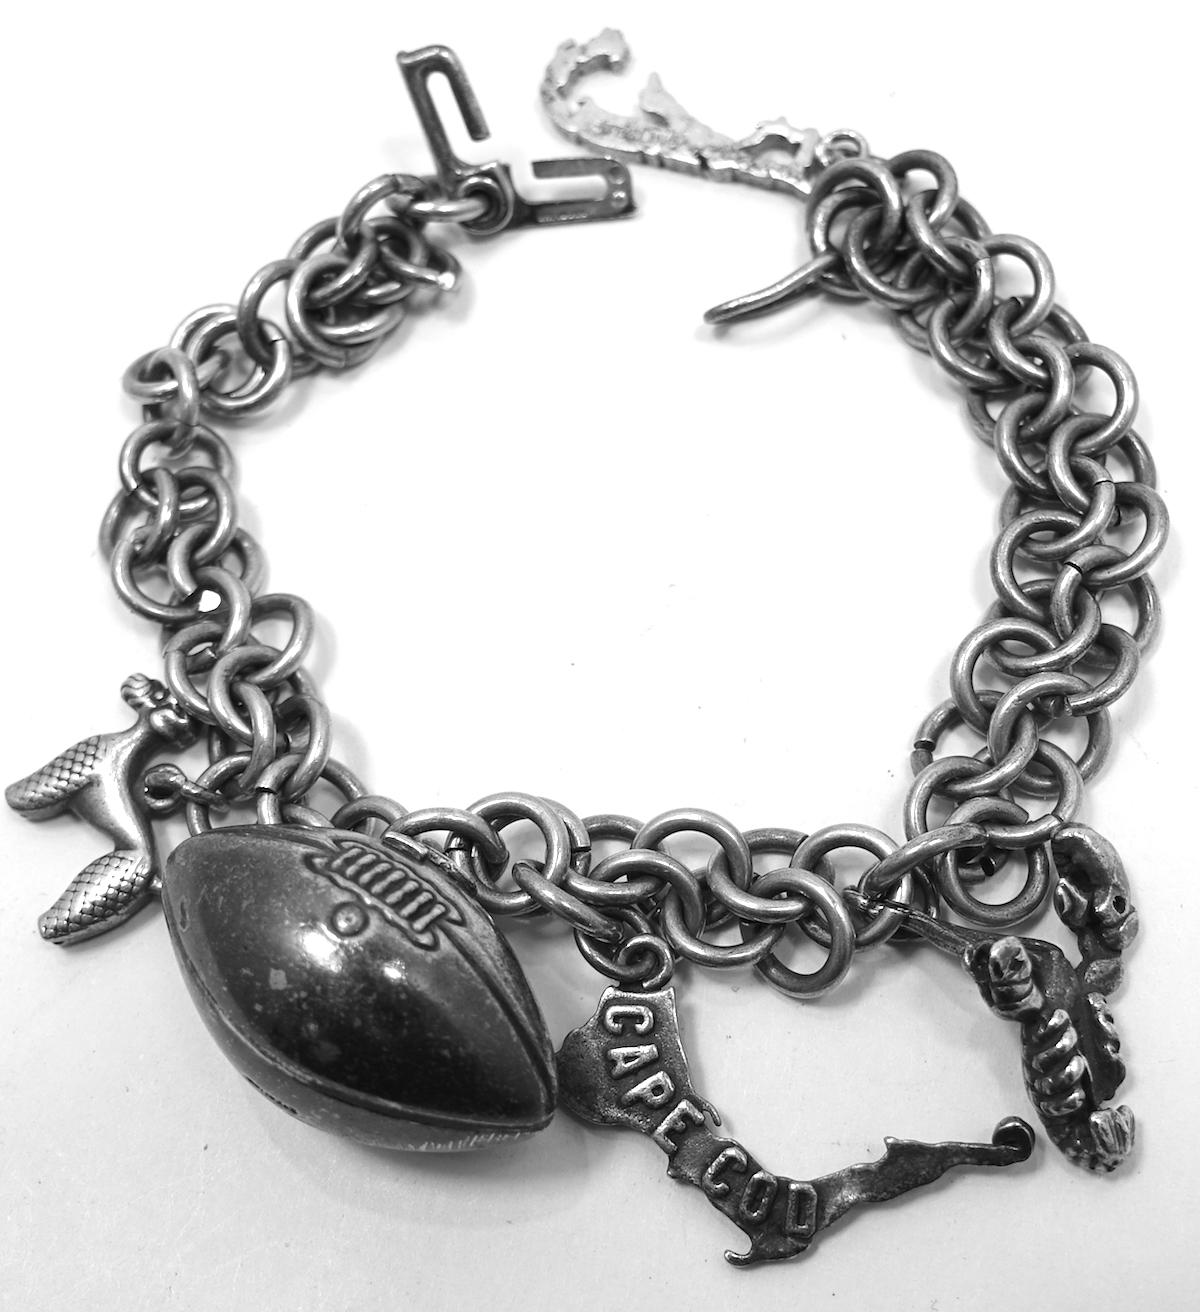 This vintage bracelet has 5 charms on a sterling silver twisted link bracelet. The charms consist of a football that measures 1” x 5/8”, a lobster, a Cape Cod map, a Bermuda map, and a poodle.  The bracelet is 7”. In excellent condition, this